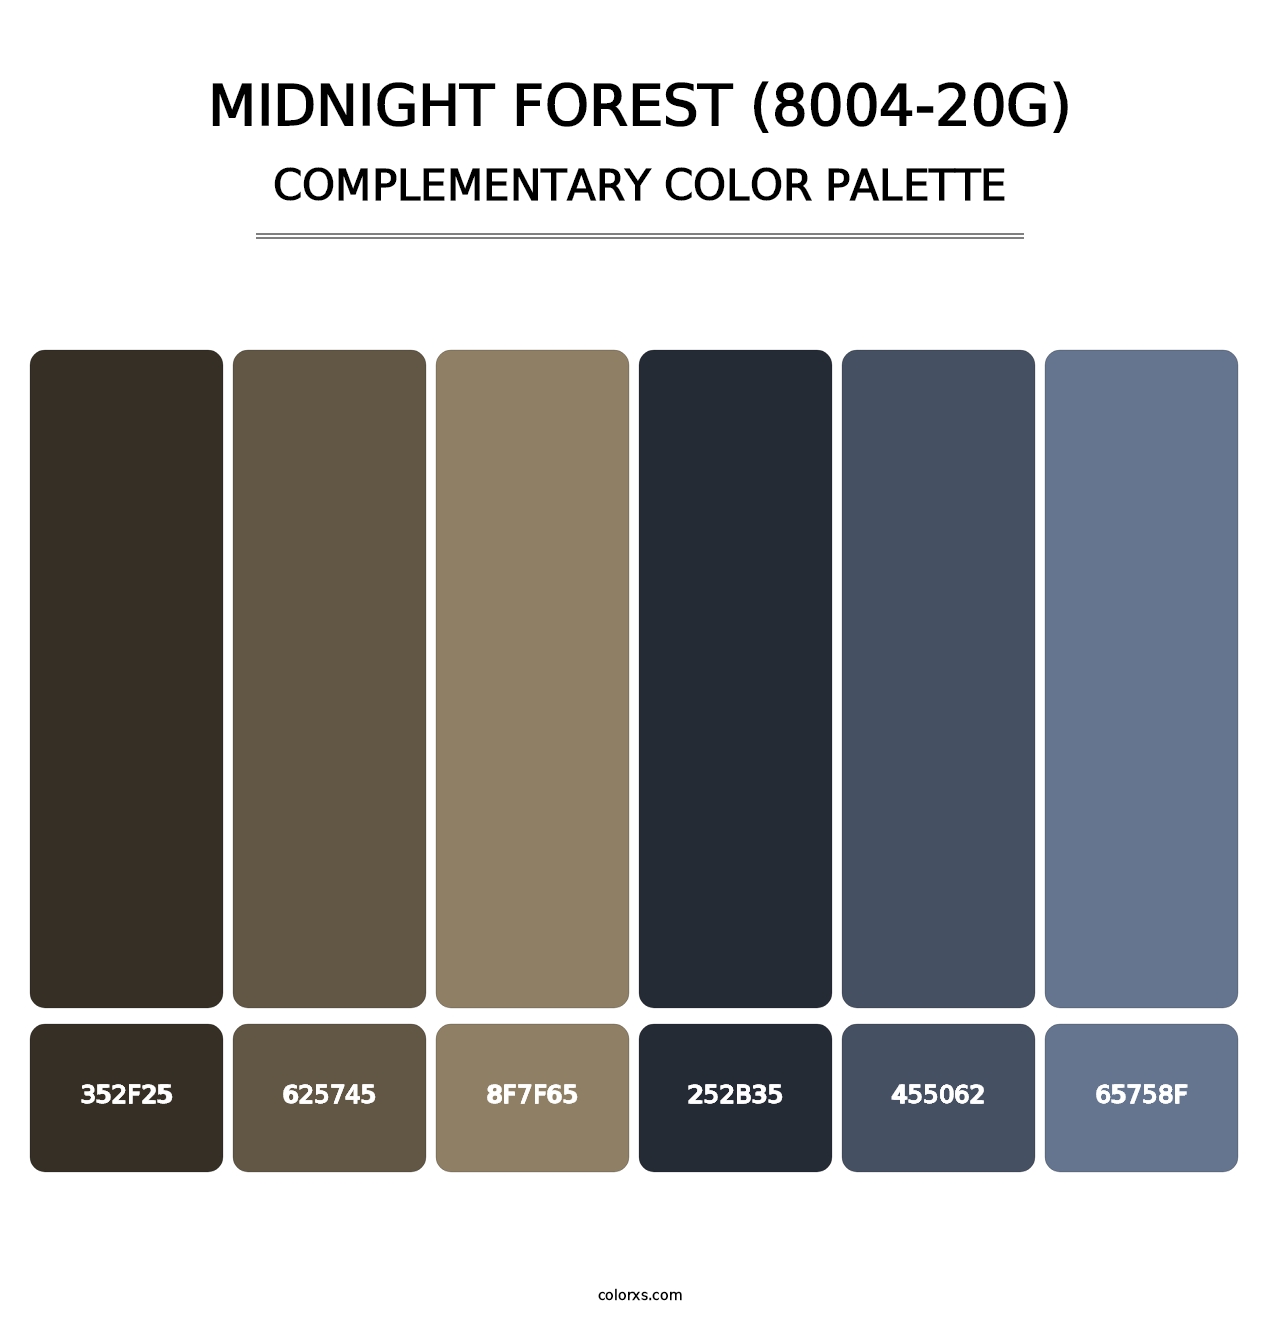 Midnight Forest (8004-20G) - Complementary Color Palette